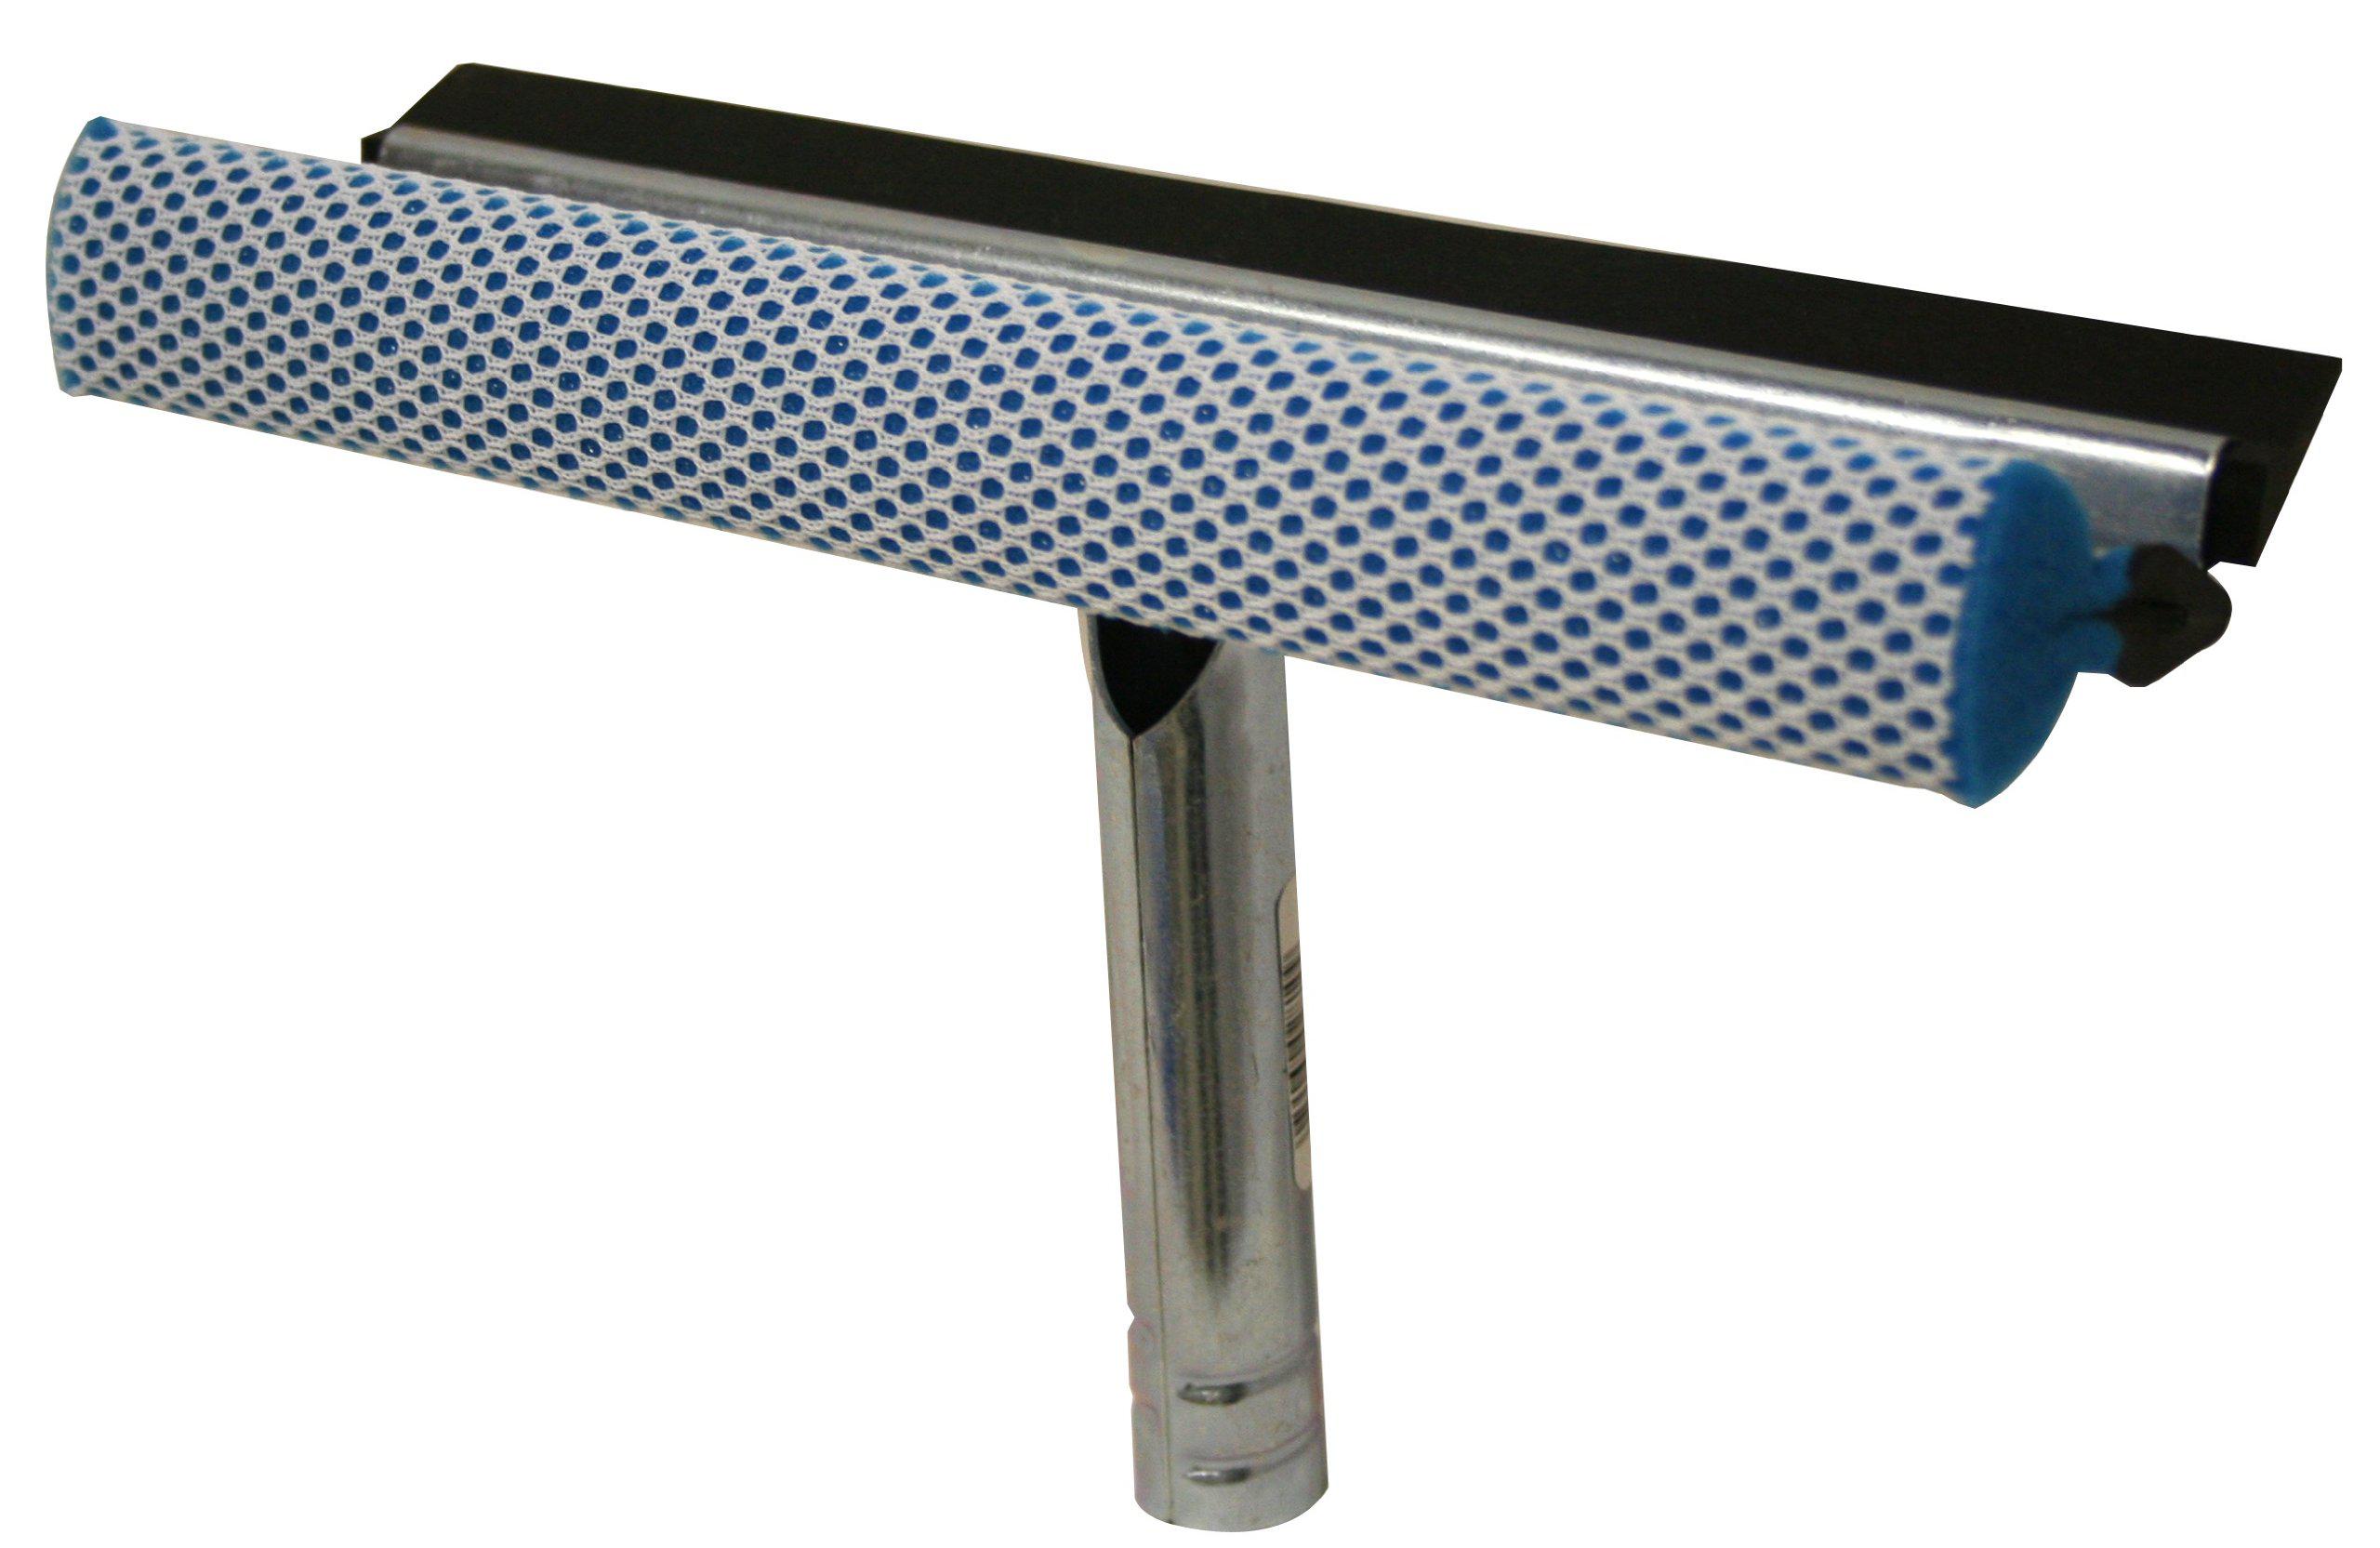 Mallory USA mallory 12-810nyu heavy-duty zinc-plated squeegee with 10" head